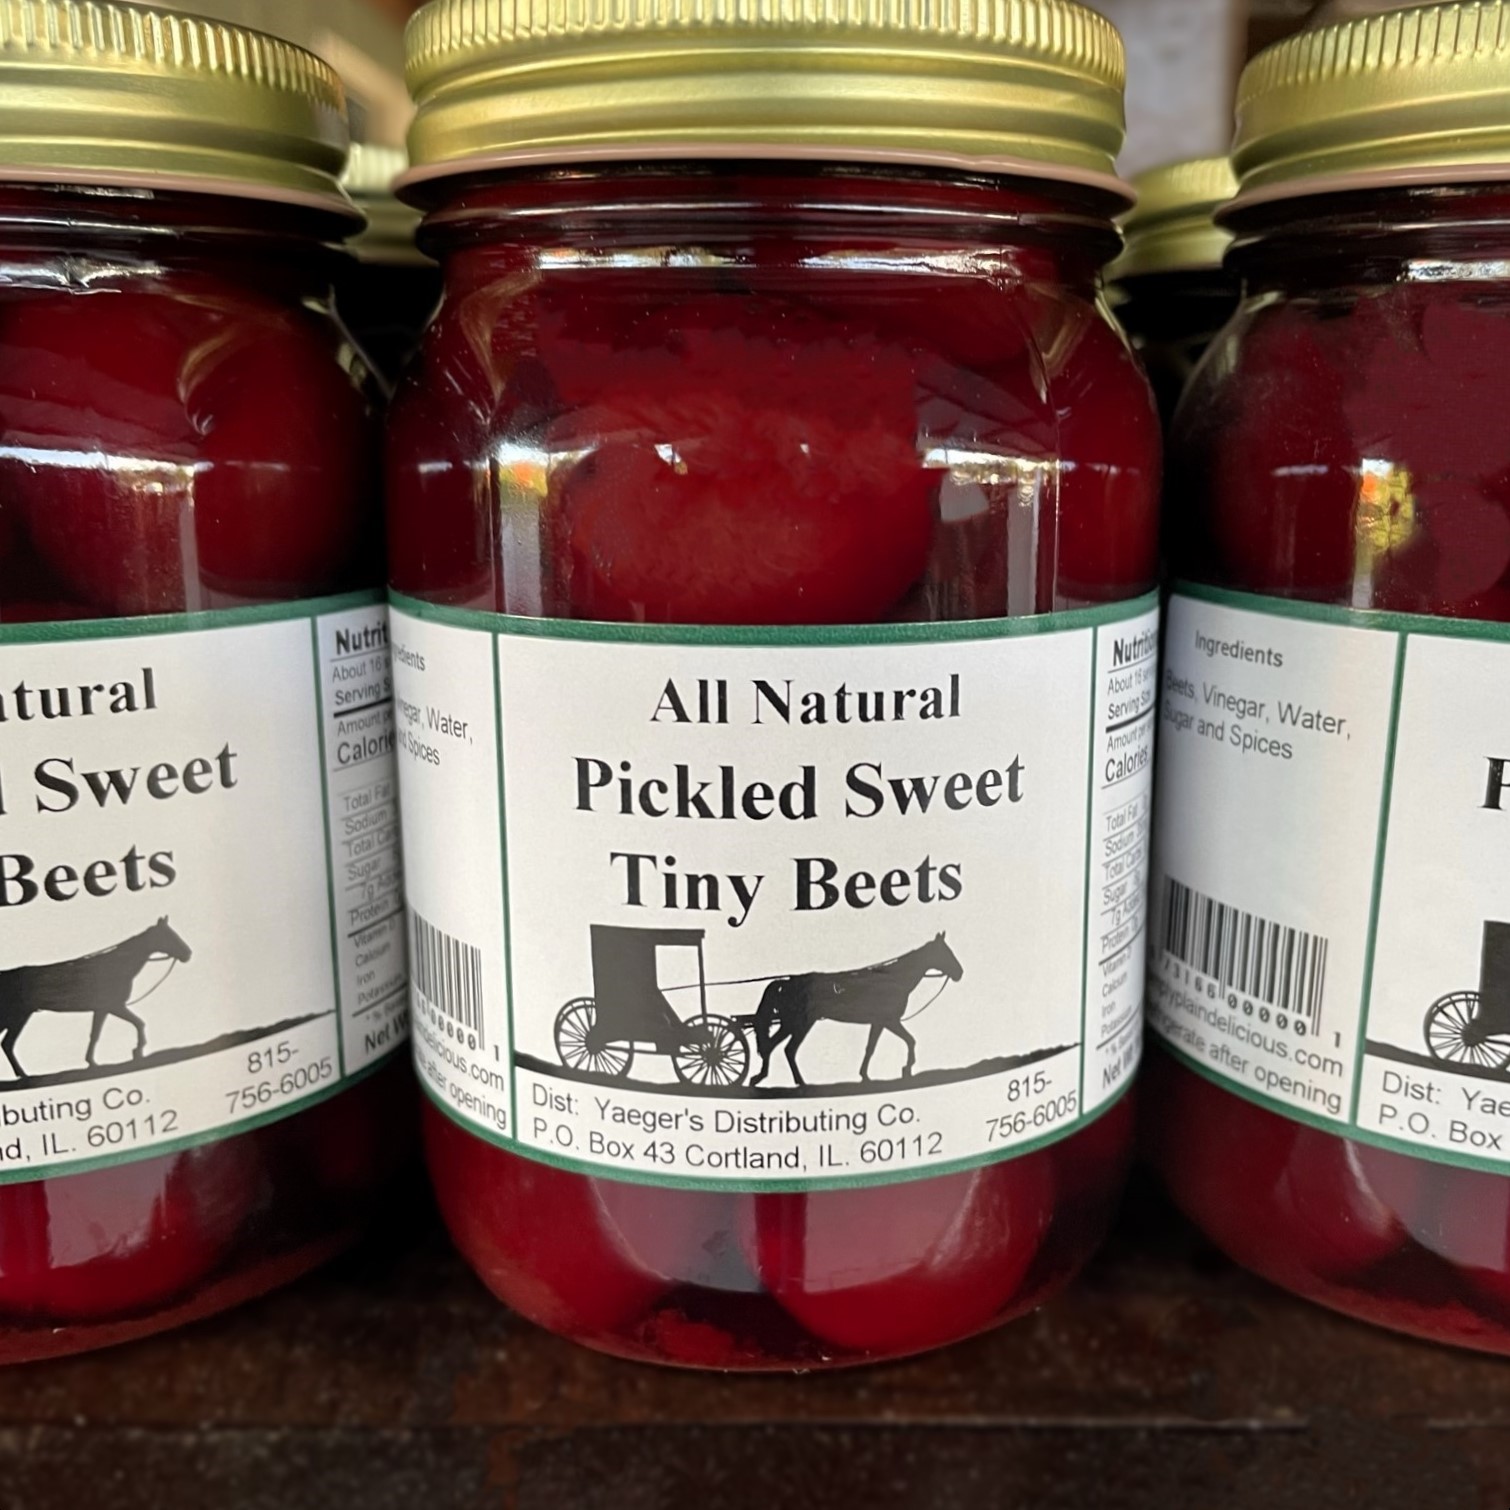 Pickled Sweet Tiny Beets - Yaeger's